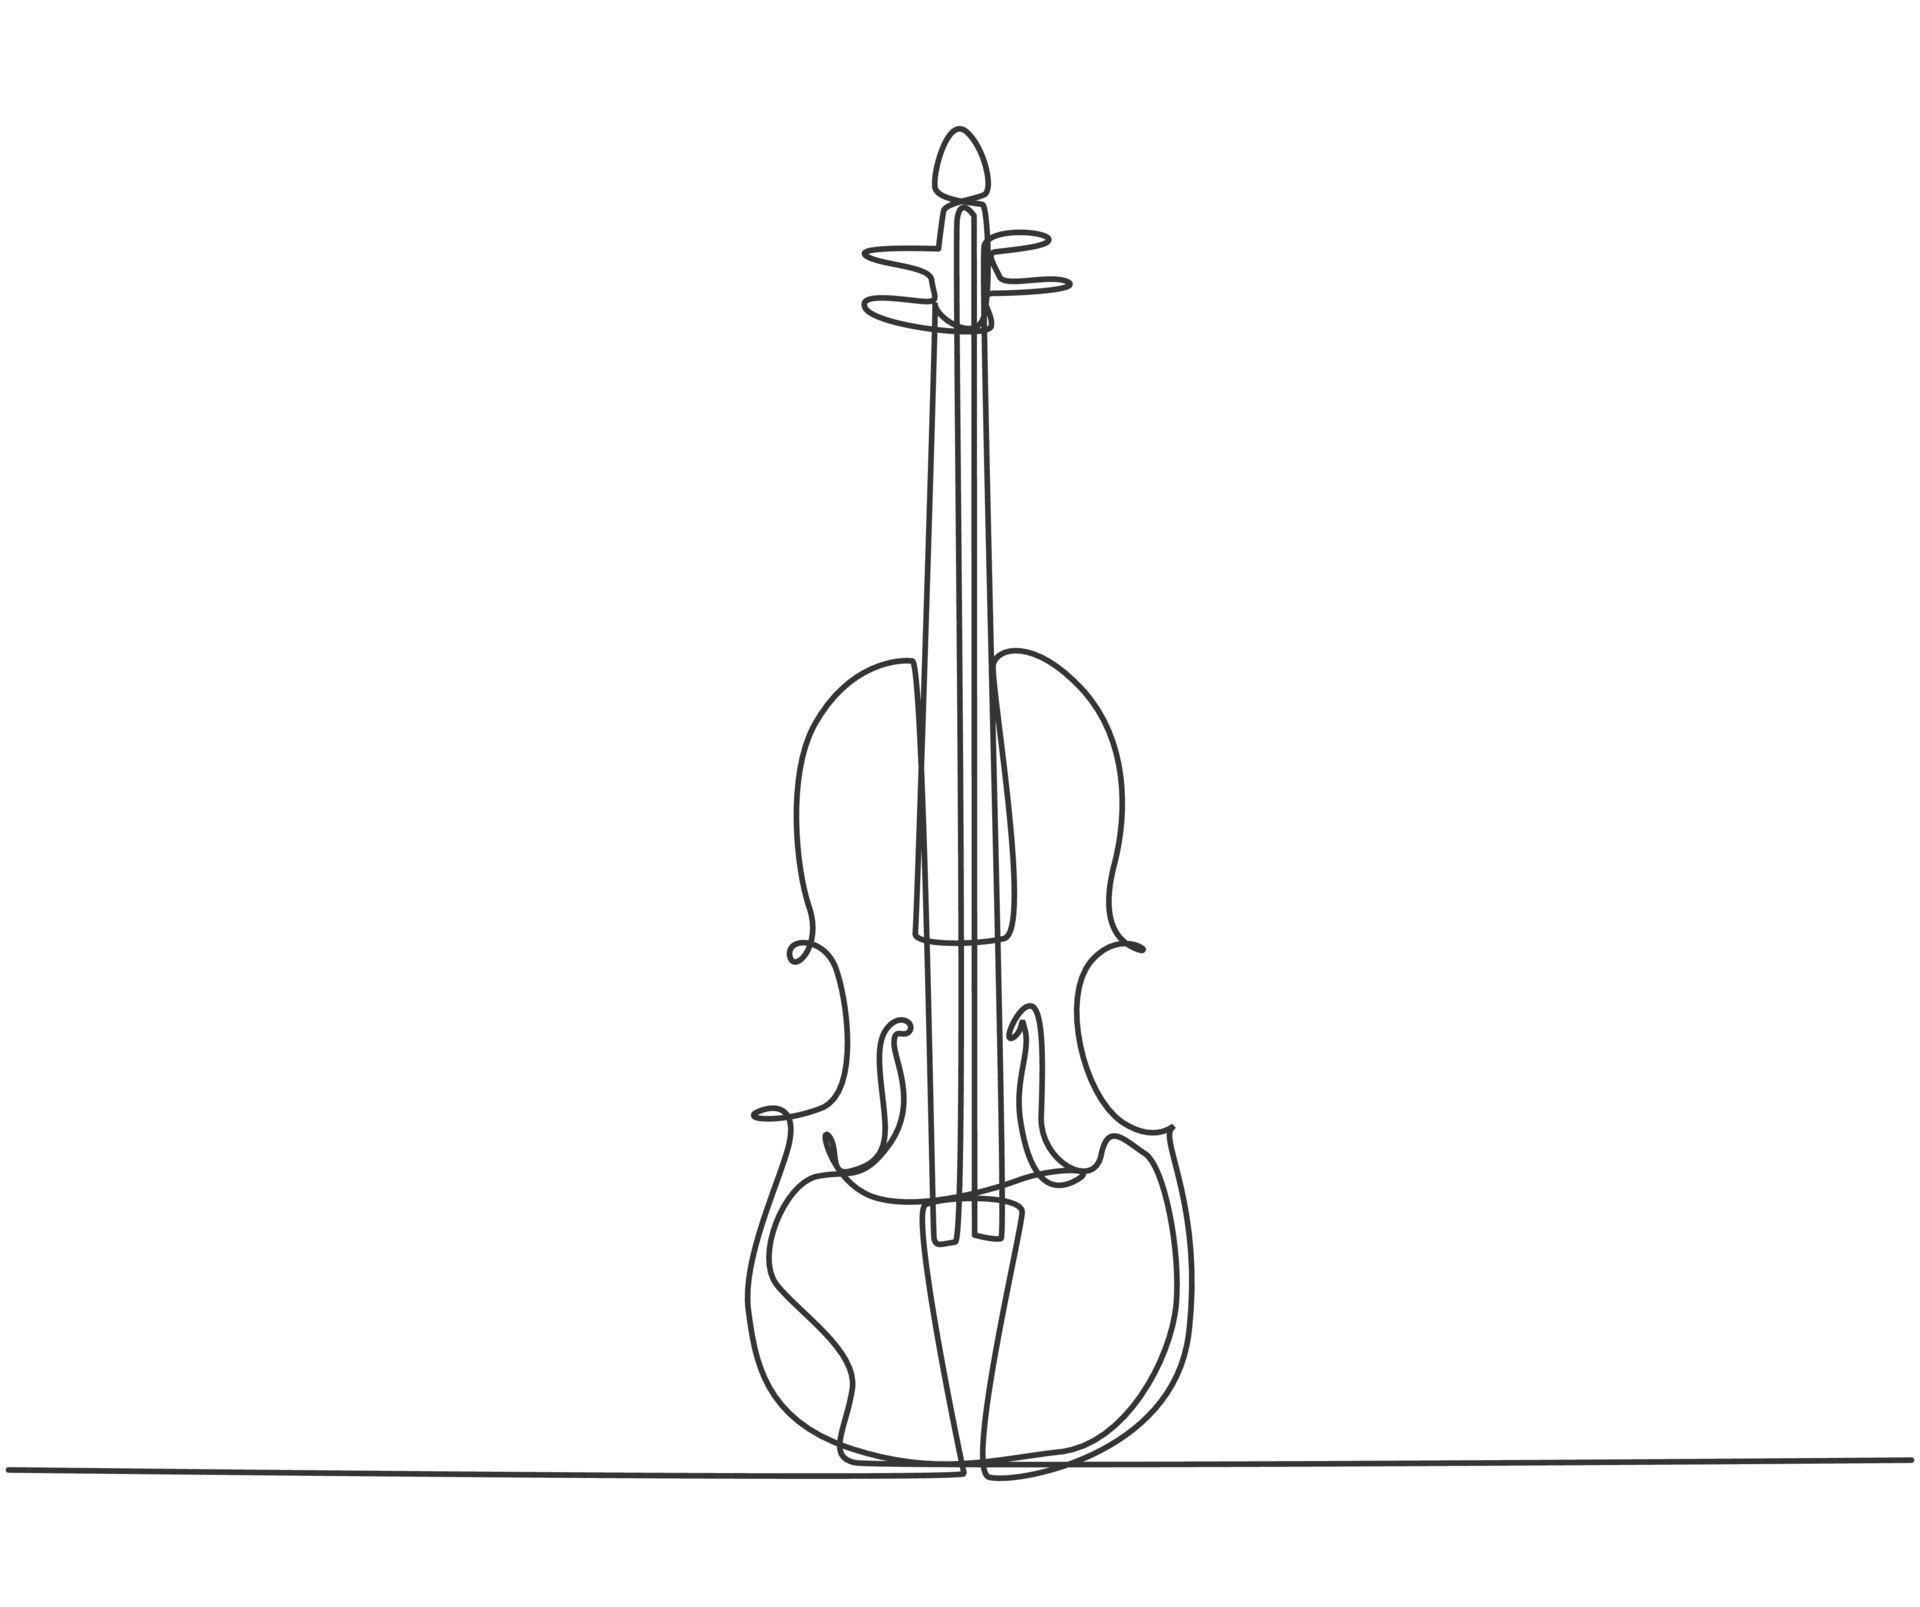 Single Continuous Line Drawing Of Violin On White Background Trendy